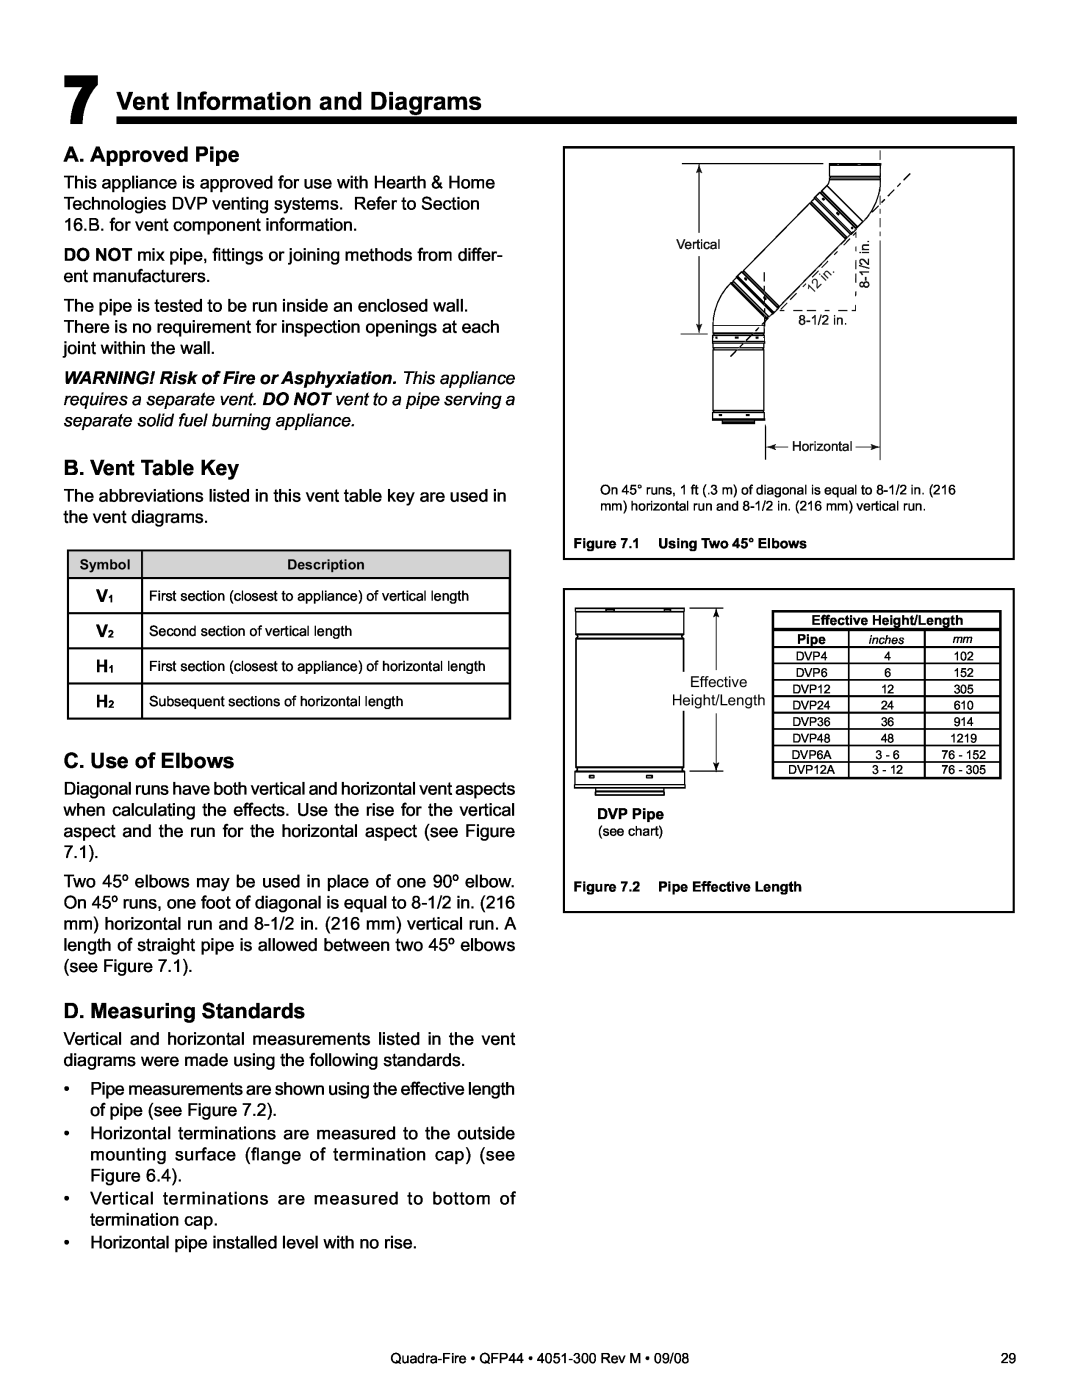 Quadra-Fire QFP44 owner manual 7Vent Information and Diagrams, A. Approved Pipe, B. Vent Table Key, C. Use of Elbows 